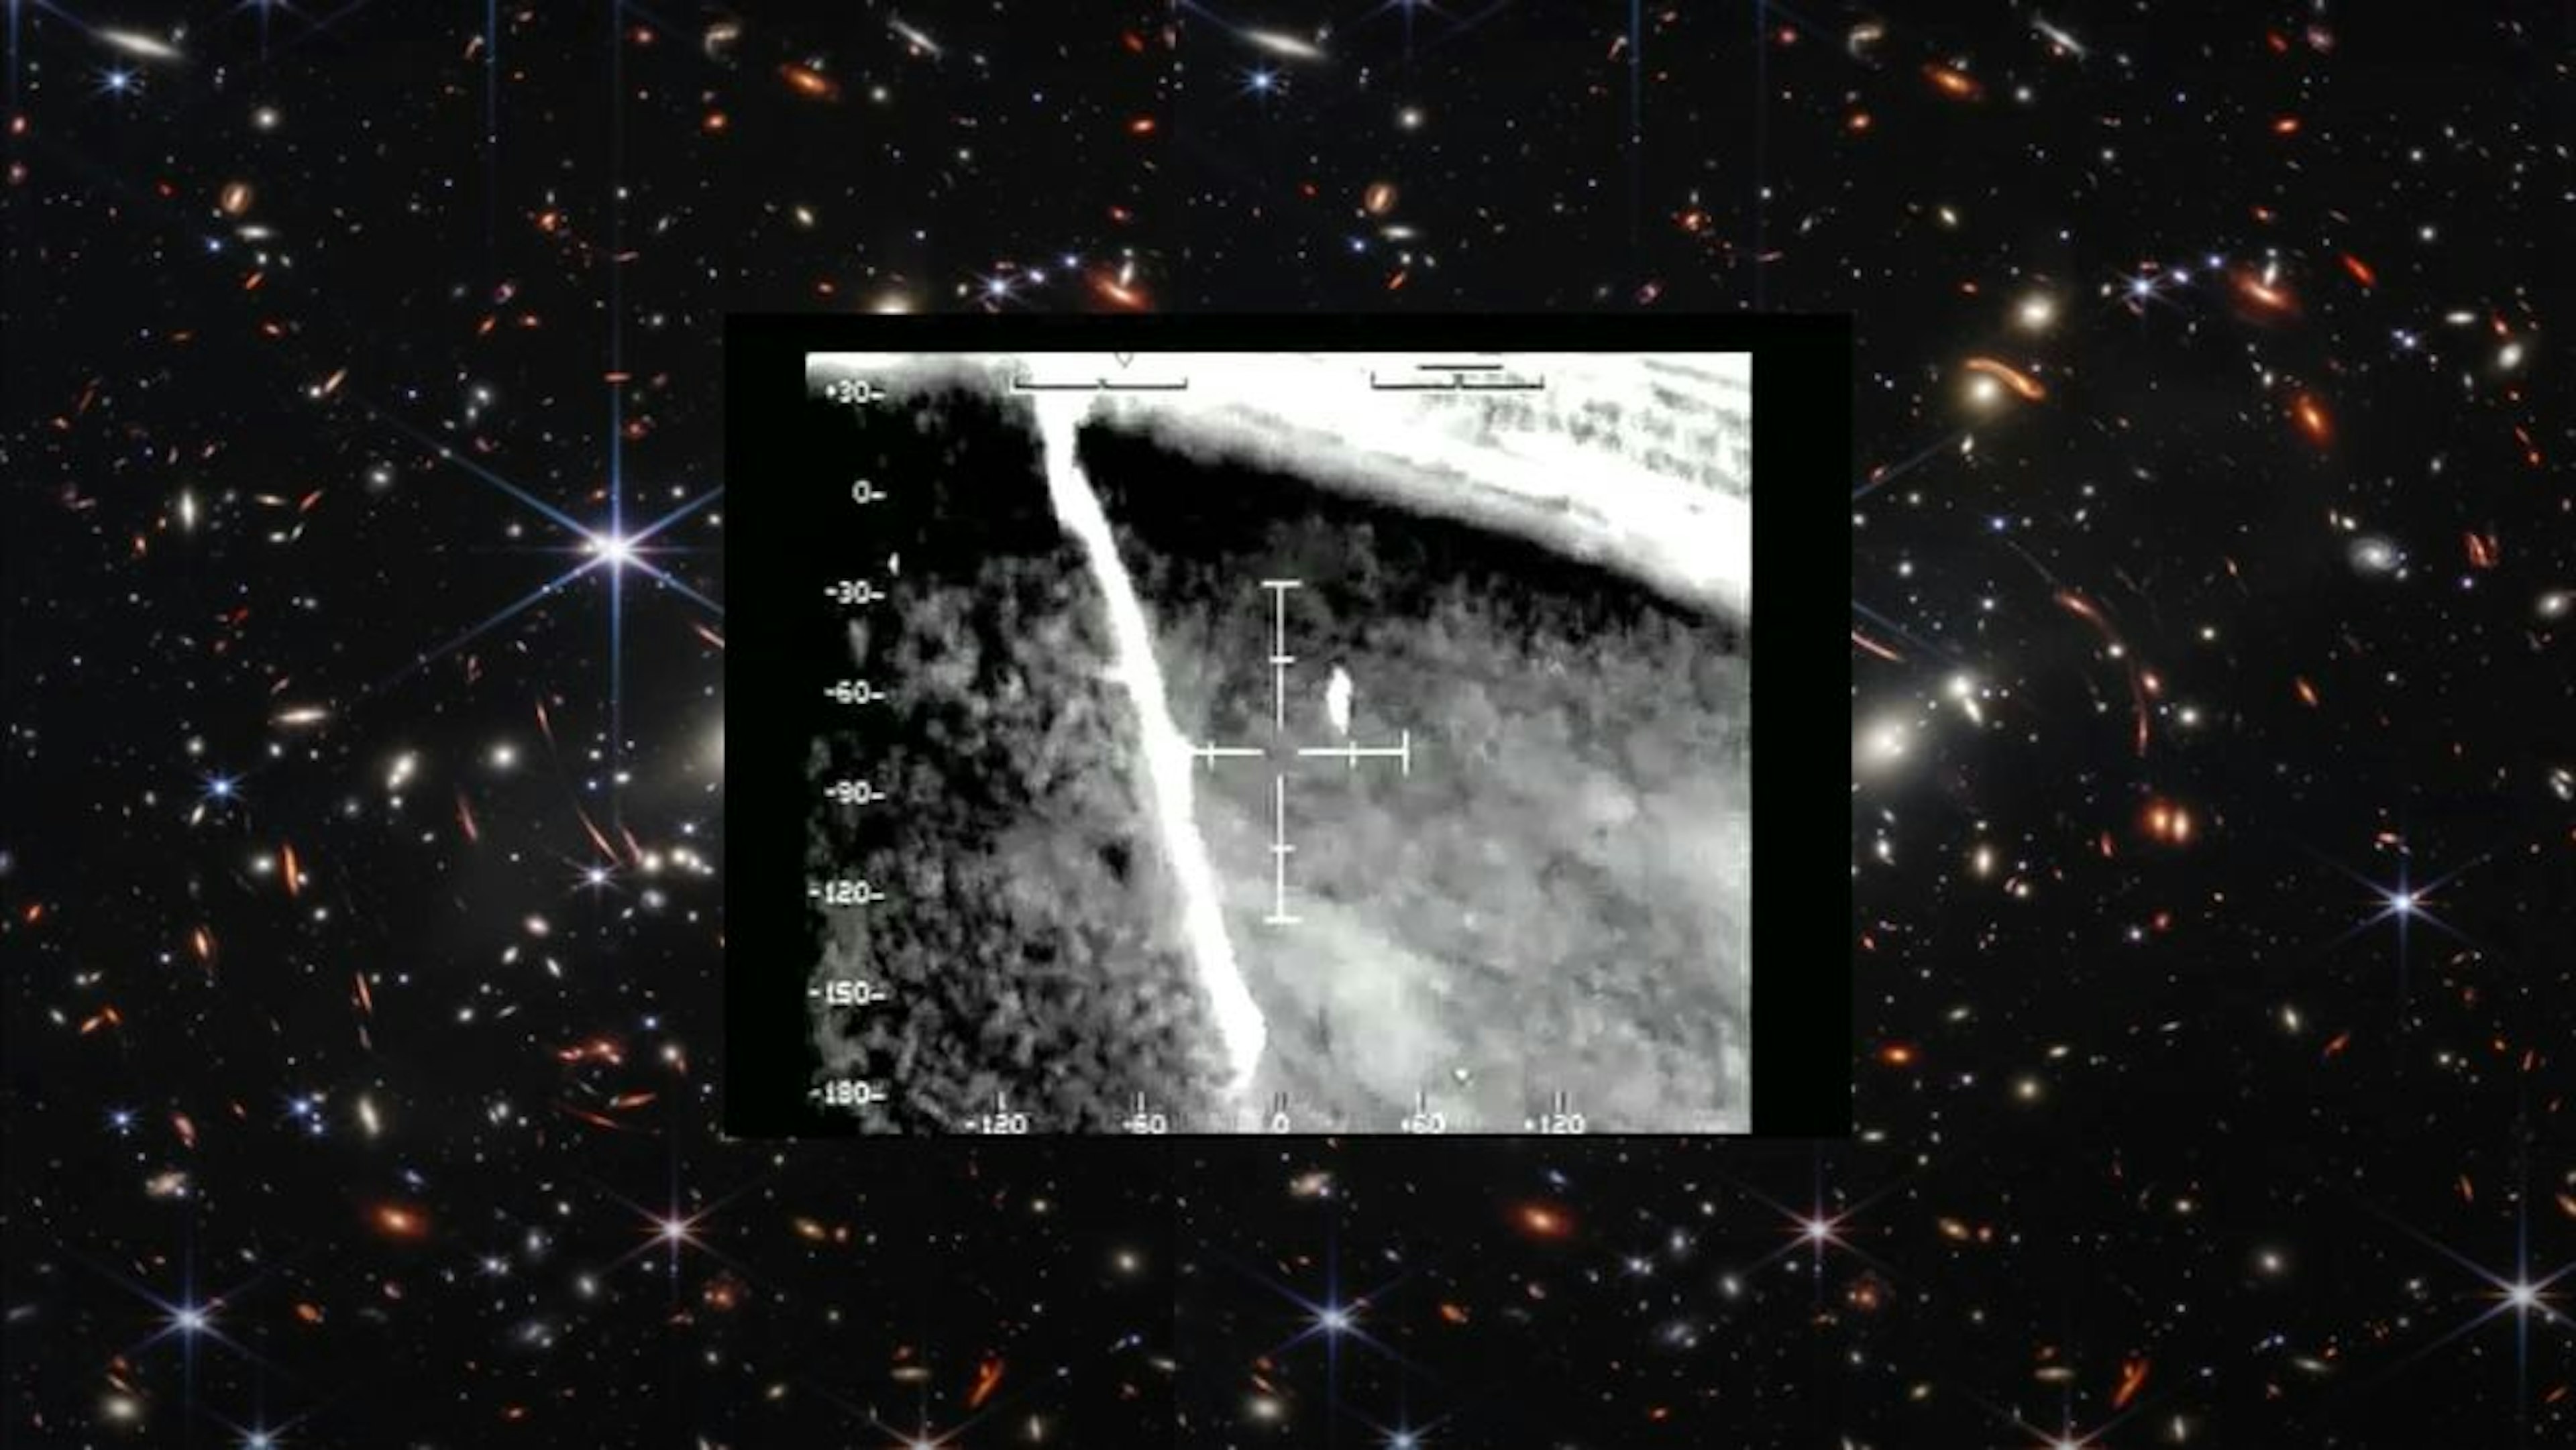 A square image is imposed over a background of stars in space. The square image is a capture of a viewfinder which showcases levels of measurements. 